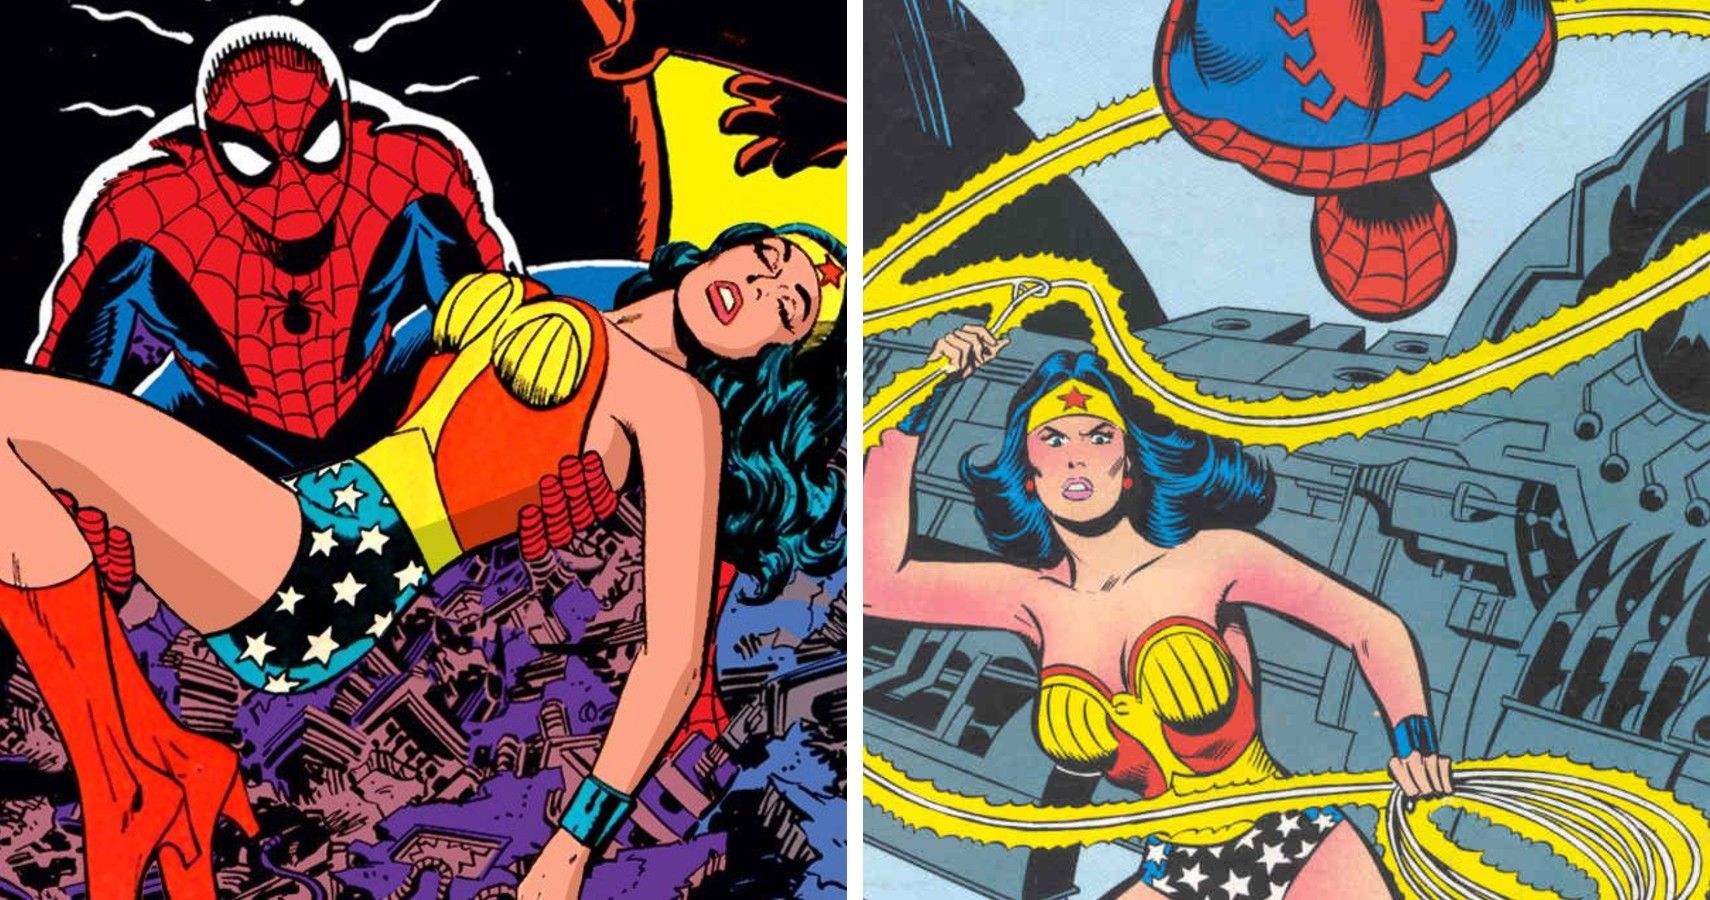 Wonder Woman Vs. Spider-Man: Who Would Win?